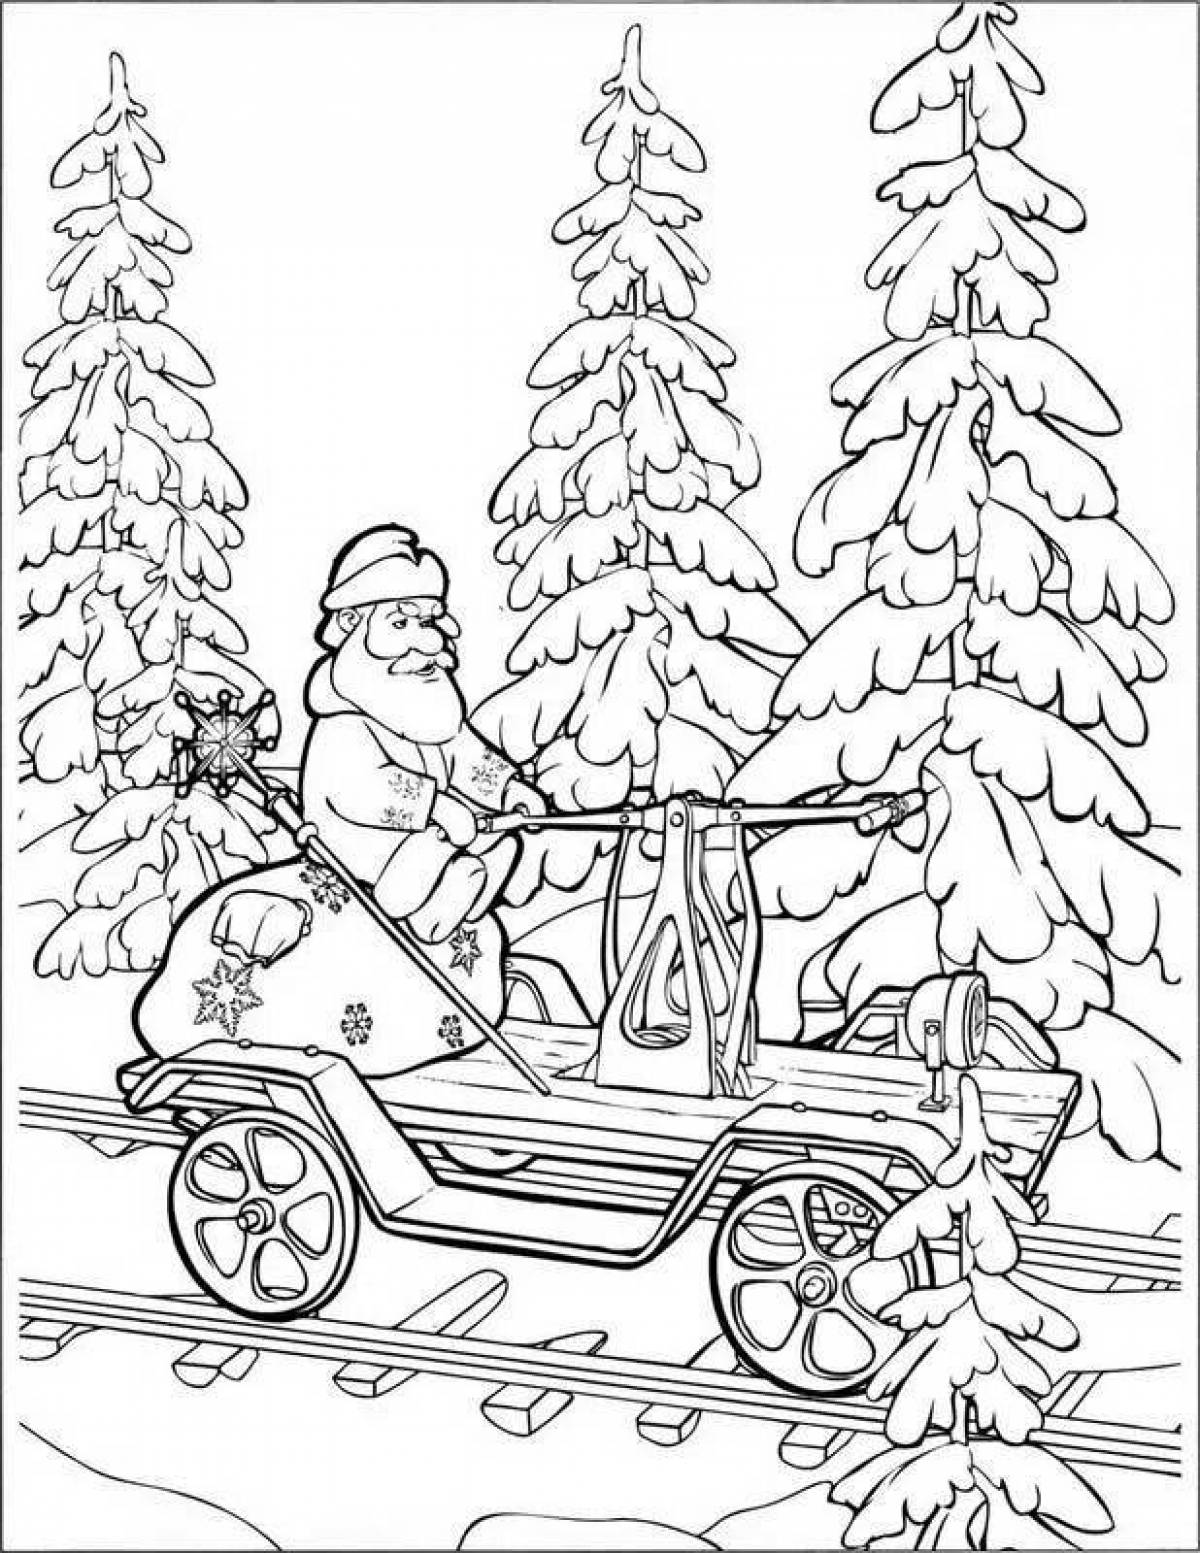 Live Christmas car coloring